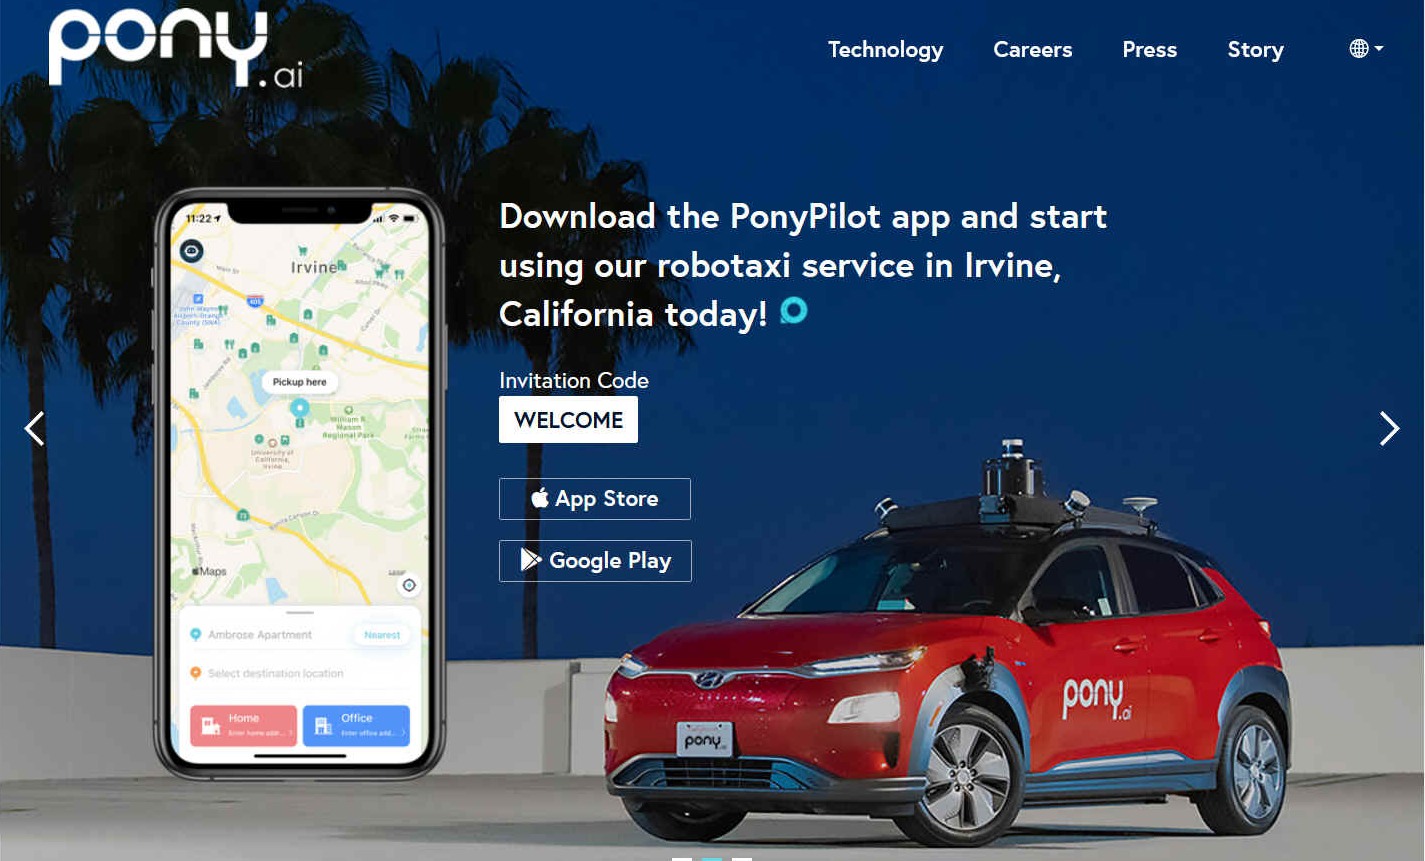 Download the PonyPilot smartphone app for their robotaxi service in Irvine, California